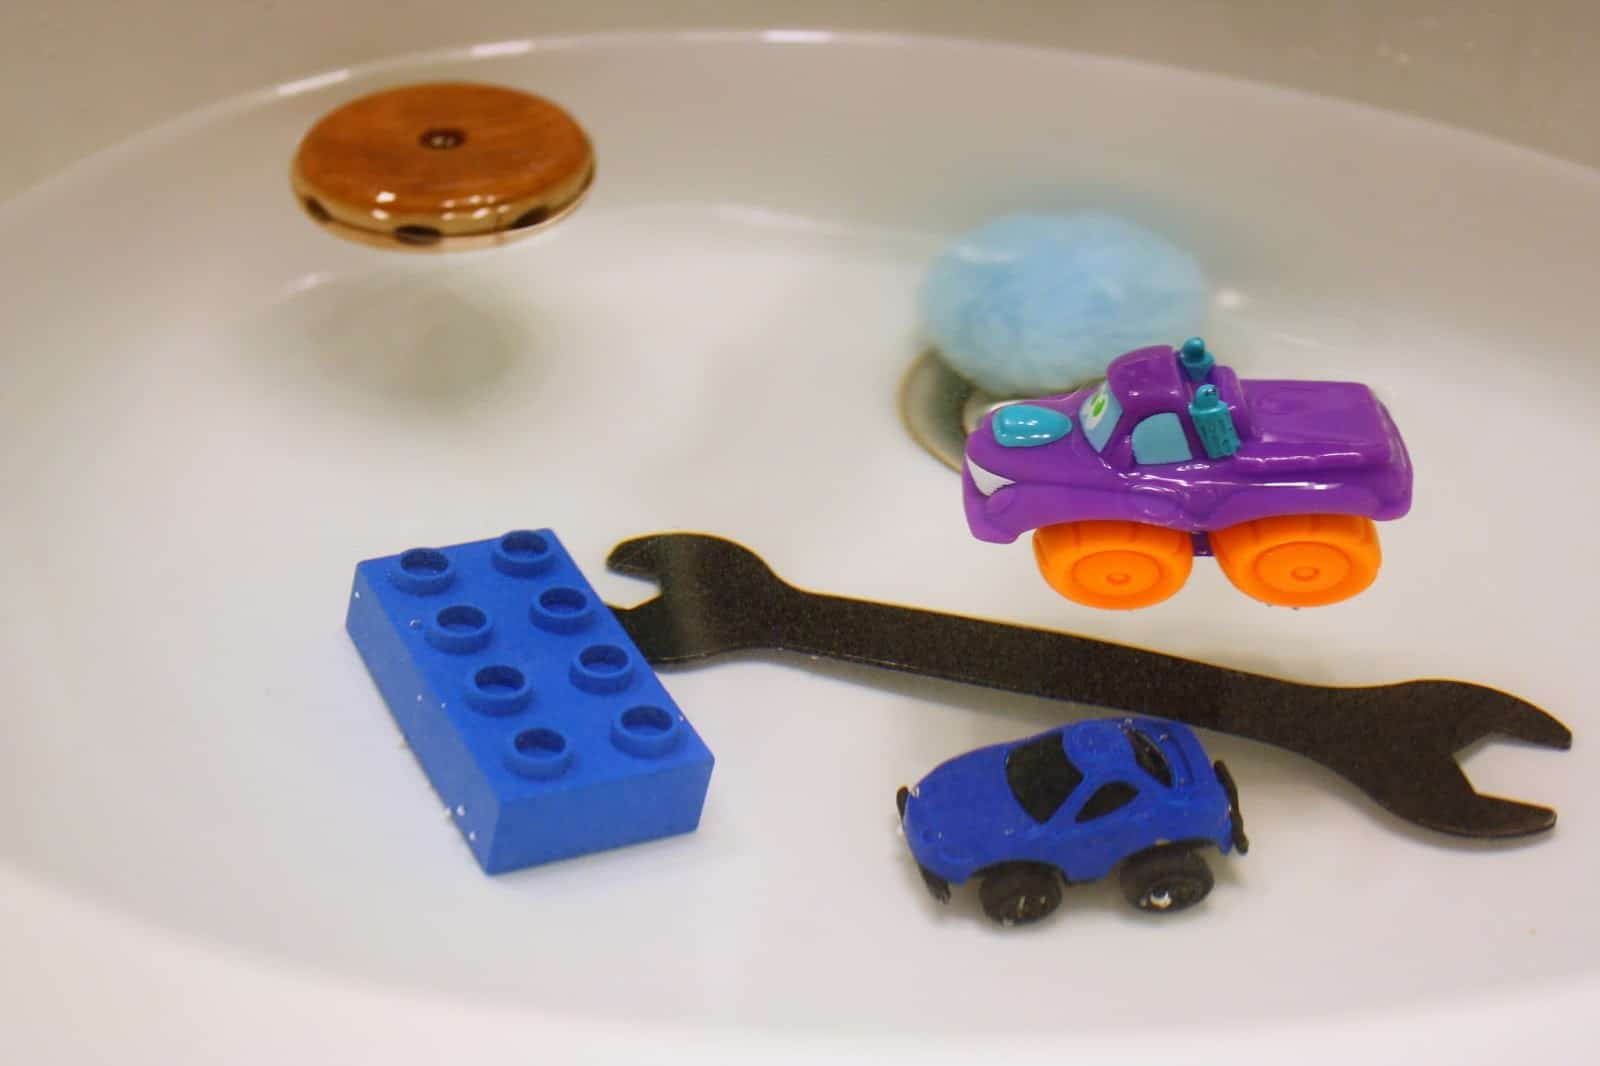 Toddler Science activities: water play sink or float with toys